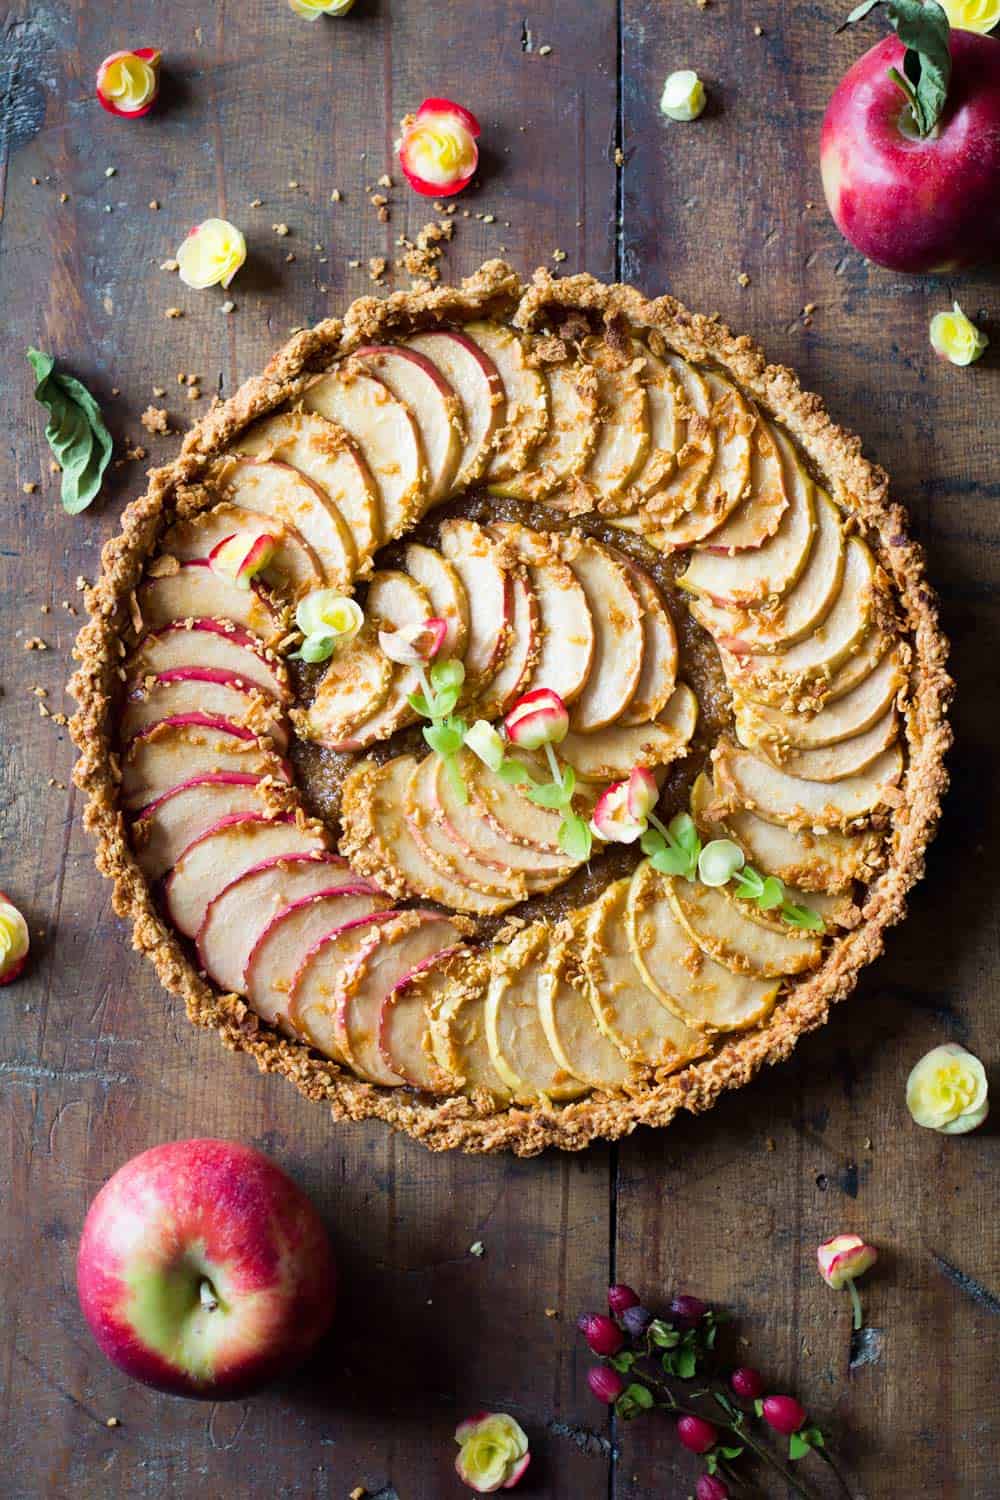 Top down view of baked apple tart on a rustic wood board and fresh apples.